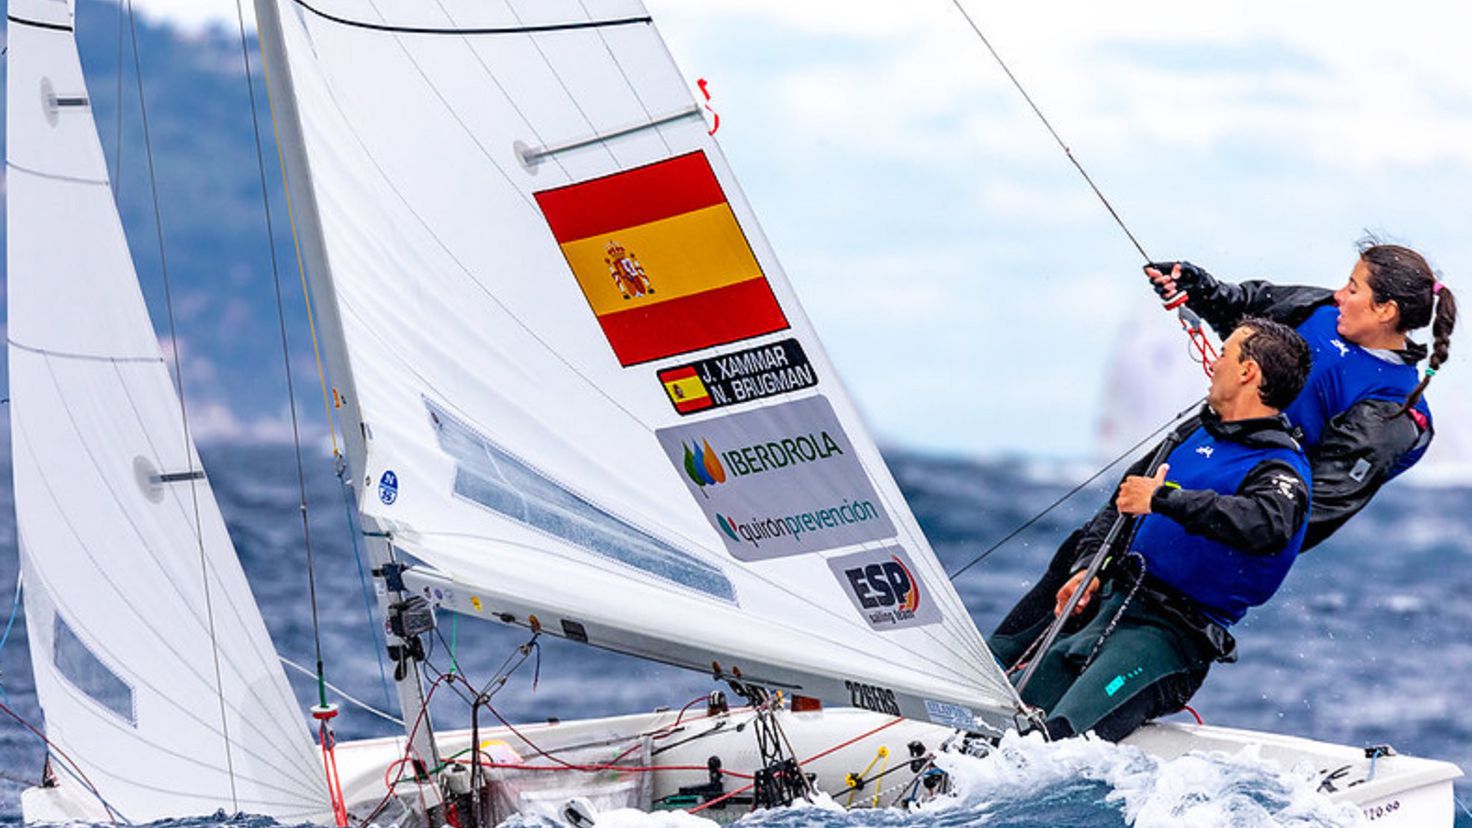 Spain is left without a medal in the European 470
